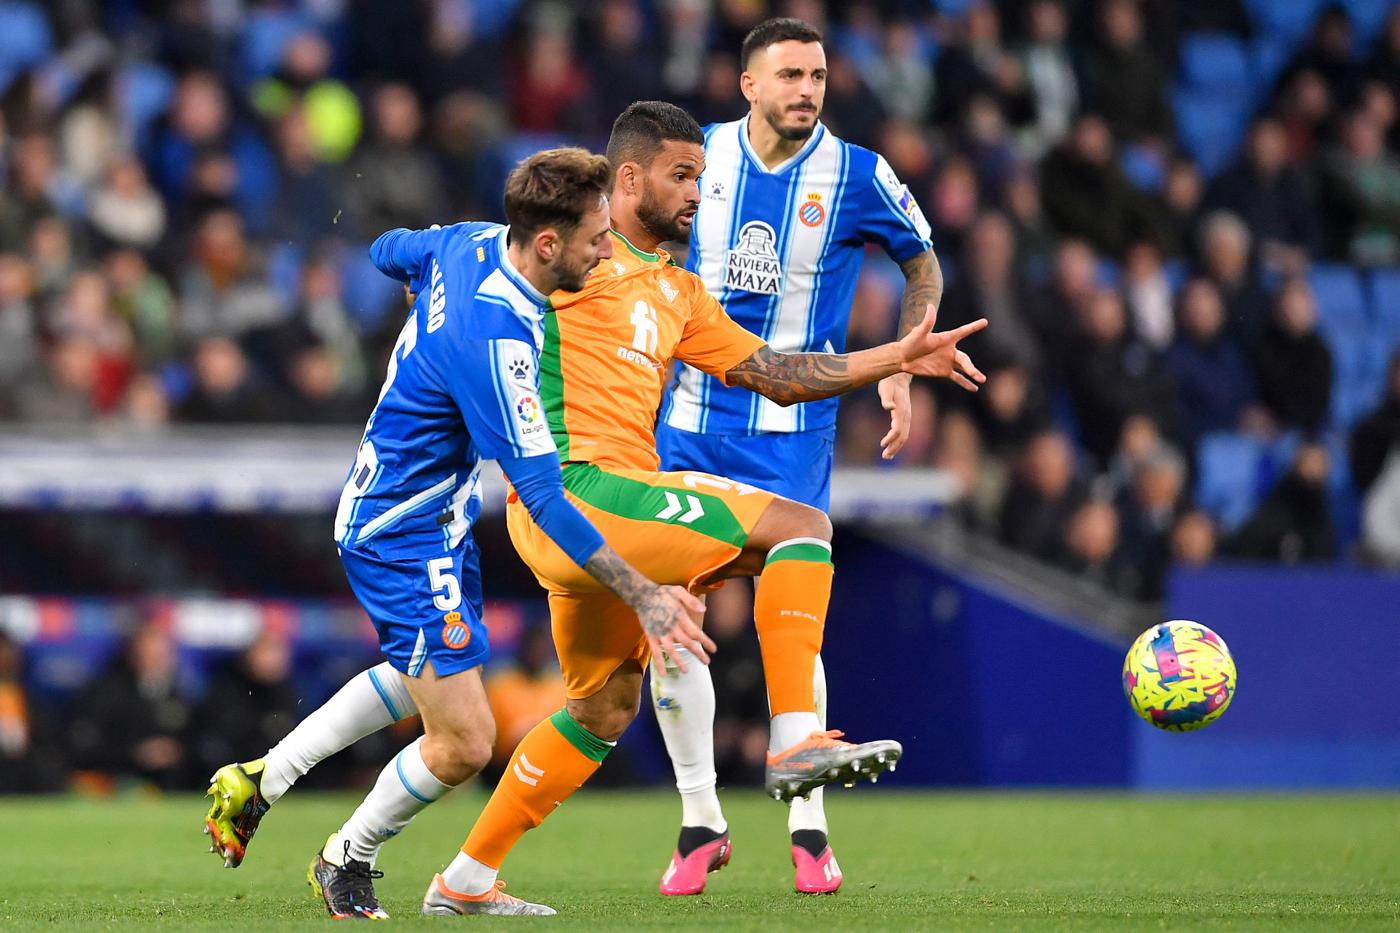 Betis - Espanyol - 3:1. Spain Championship, 29th round. Match review,